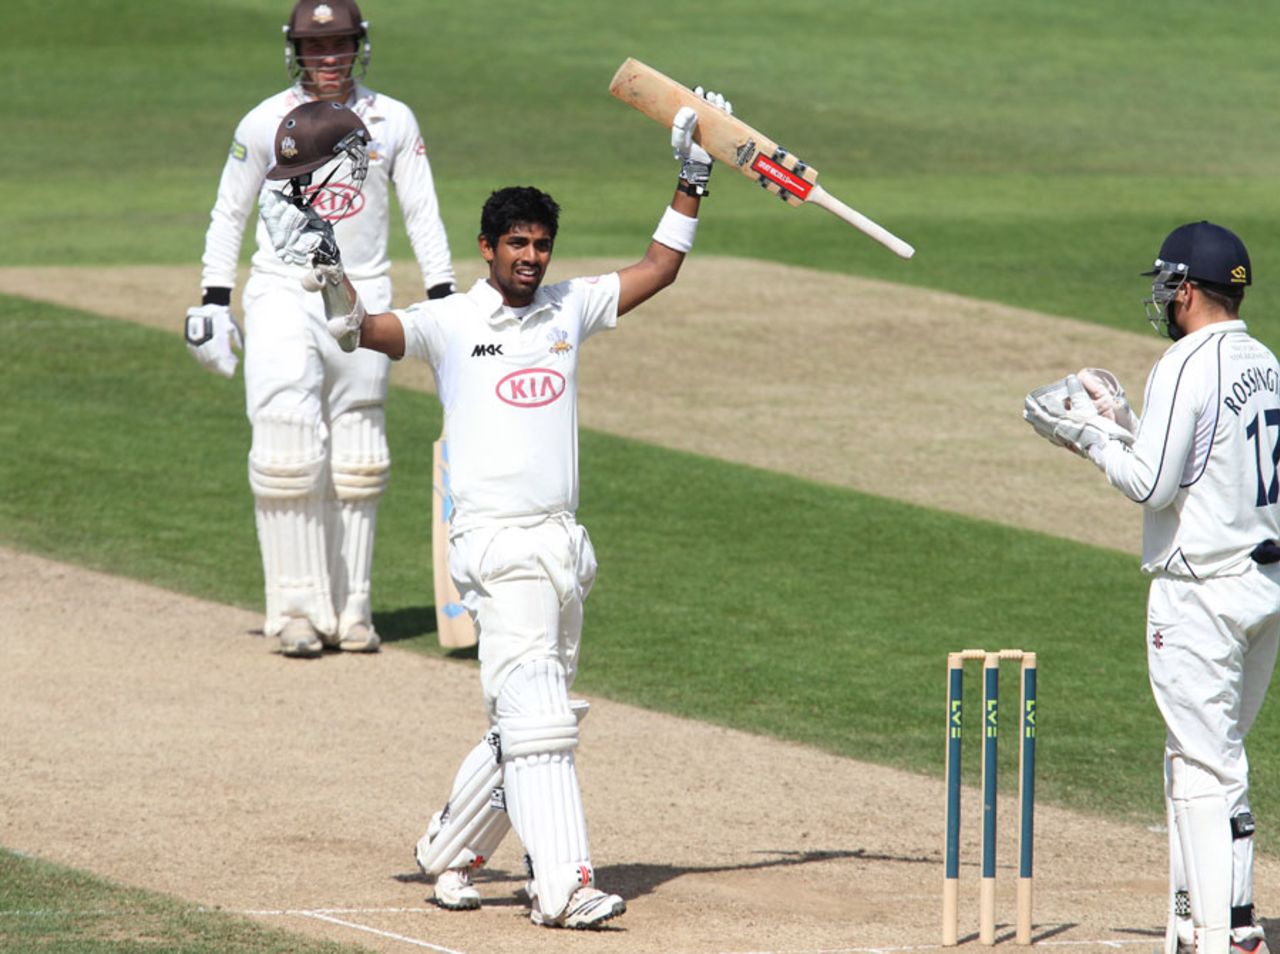 Arun Harinath celebrates reaching his maiden first-class hundred, Surrey v Middlesex, County Championship, Division One, 3rd day, August 17, 2012